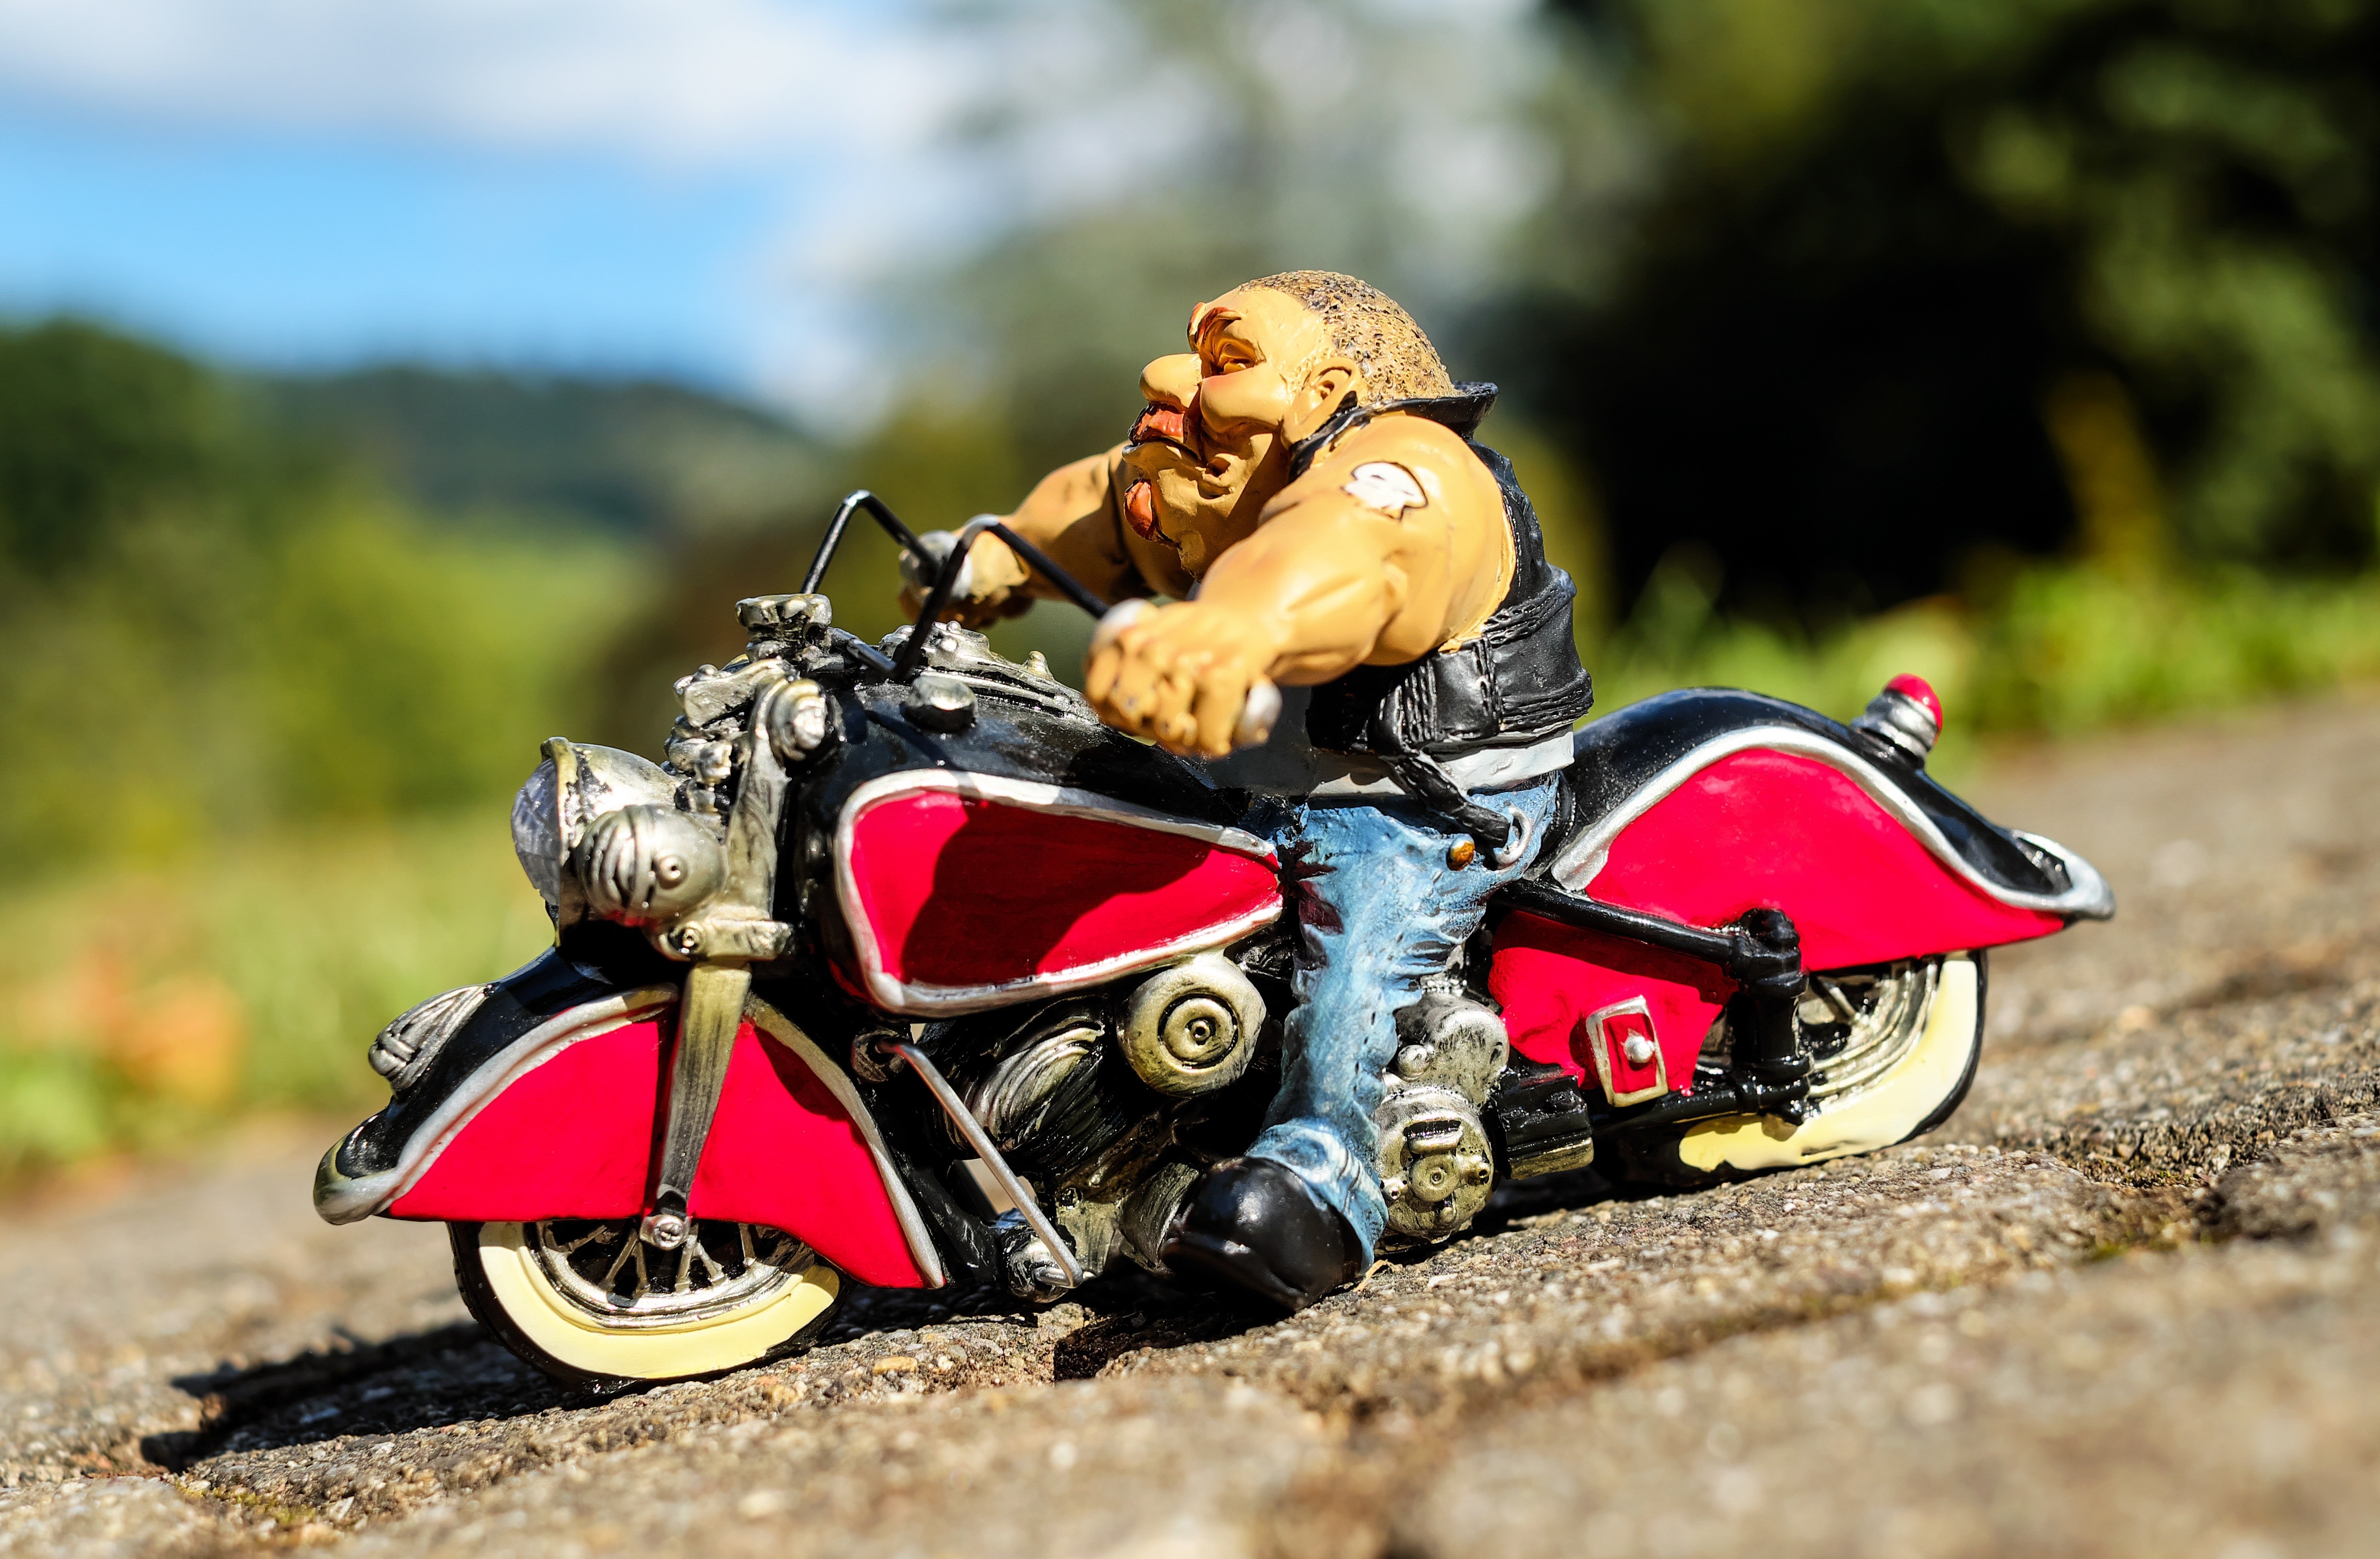 man riding in motorcycle decor